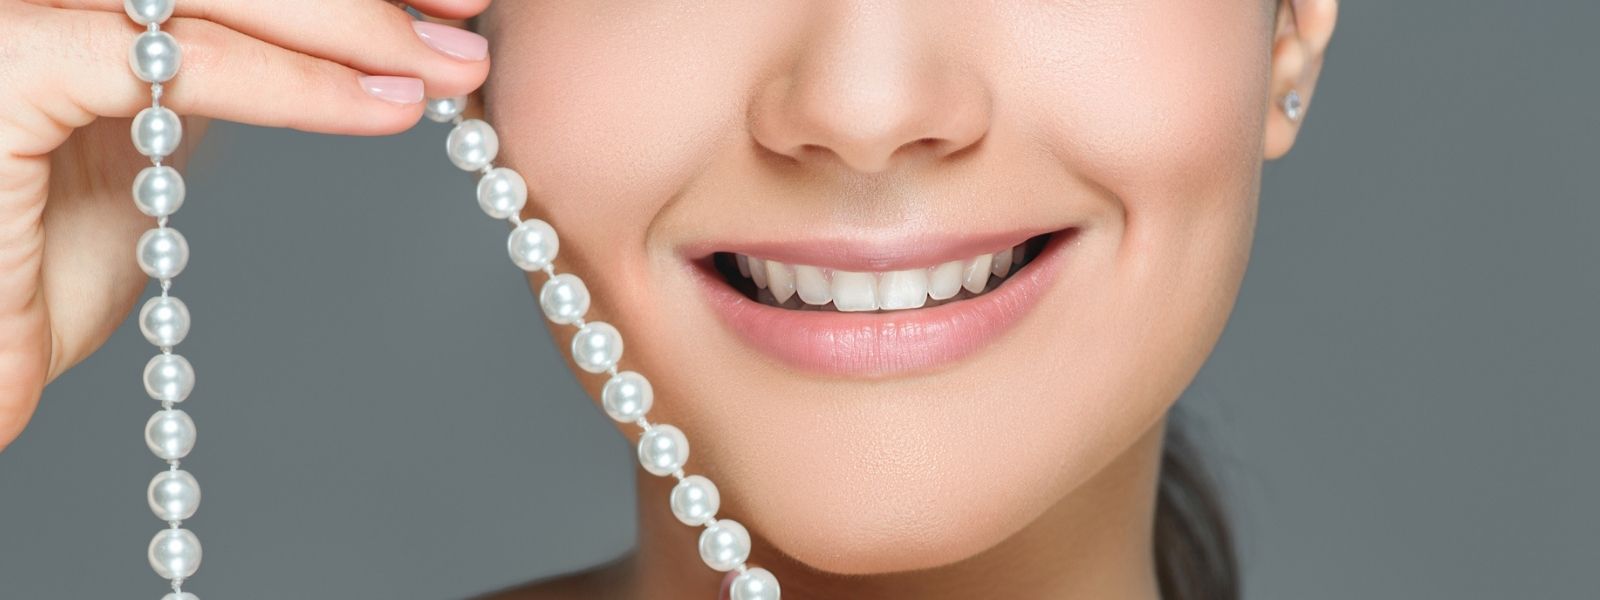 Girl comparing teeth with pearls.